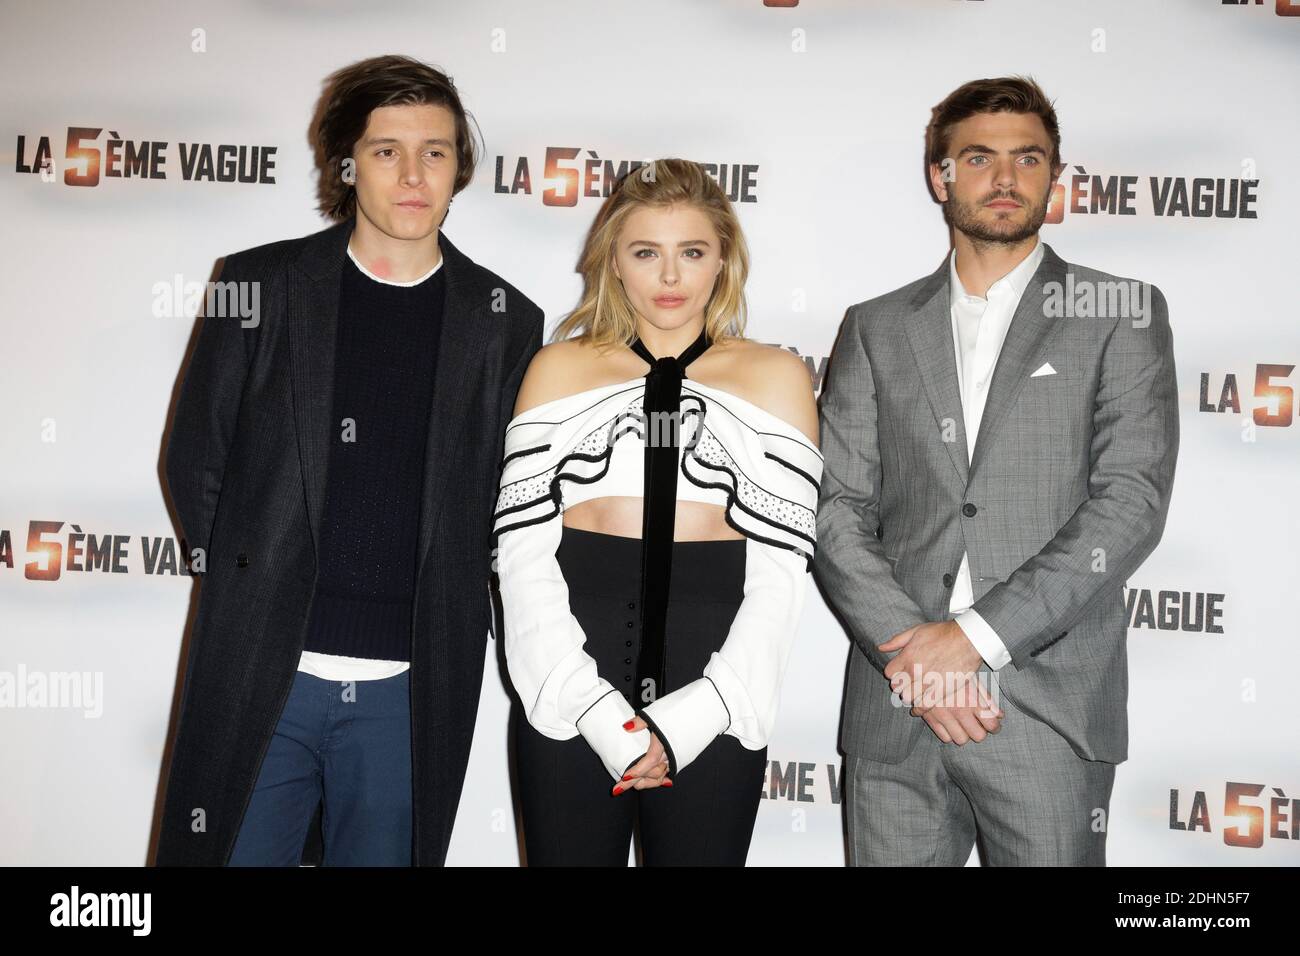 Nick Robinson, Chloe Grace Moretz and Alex Roe attending the 'La 5eme  Vague' Photocall at Le Bristol on January 20, 2016 in Paris, France. Photo  by Jerome Domine/ABACAPRESS.COM Stock Photo - Alamy